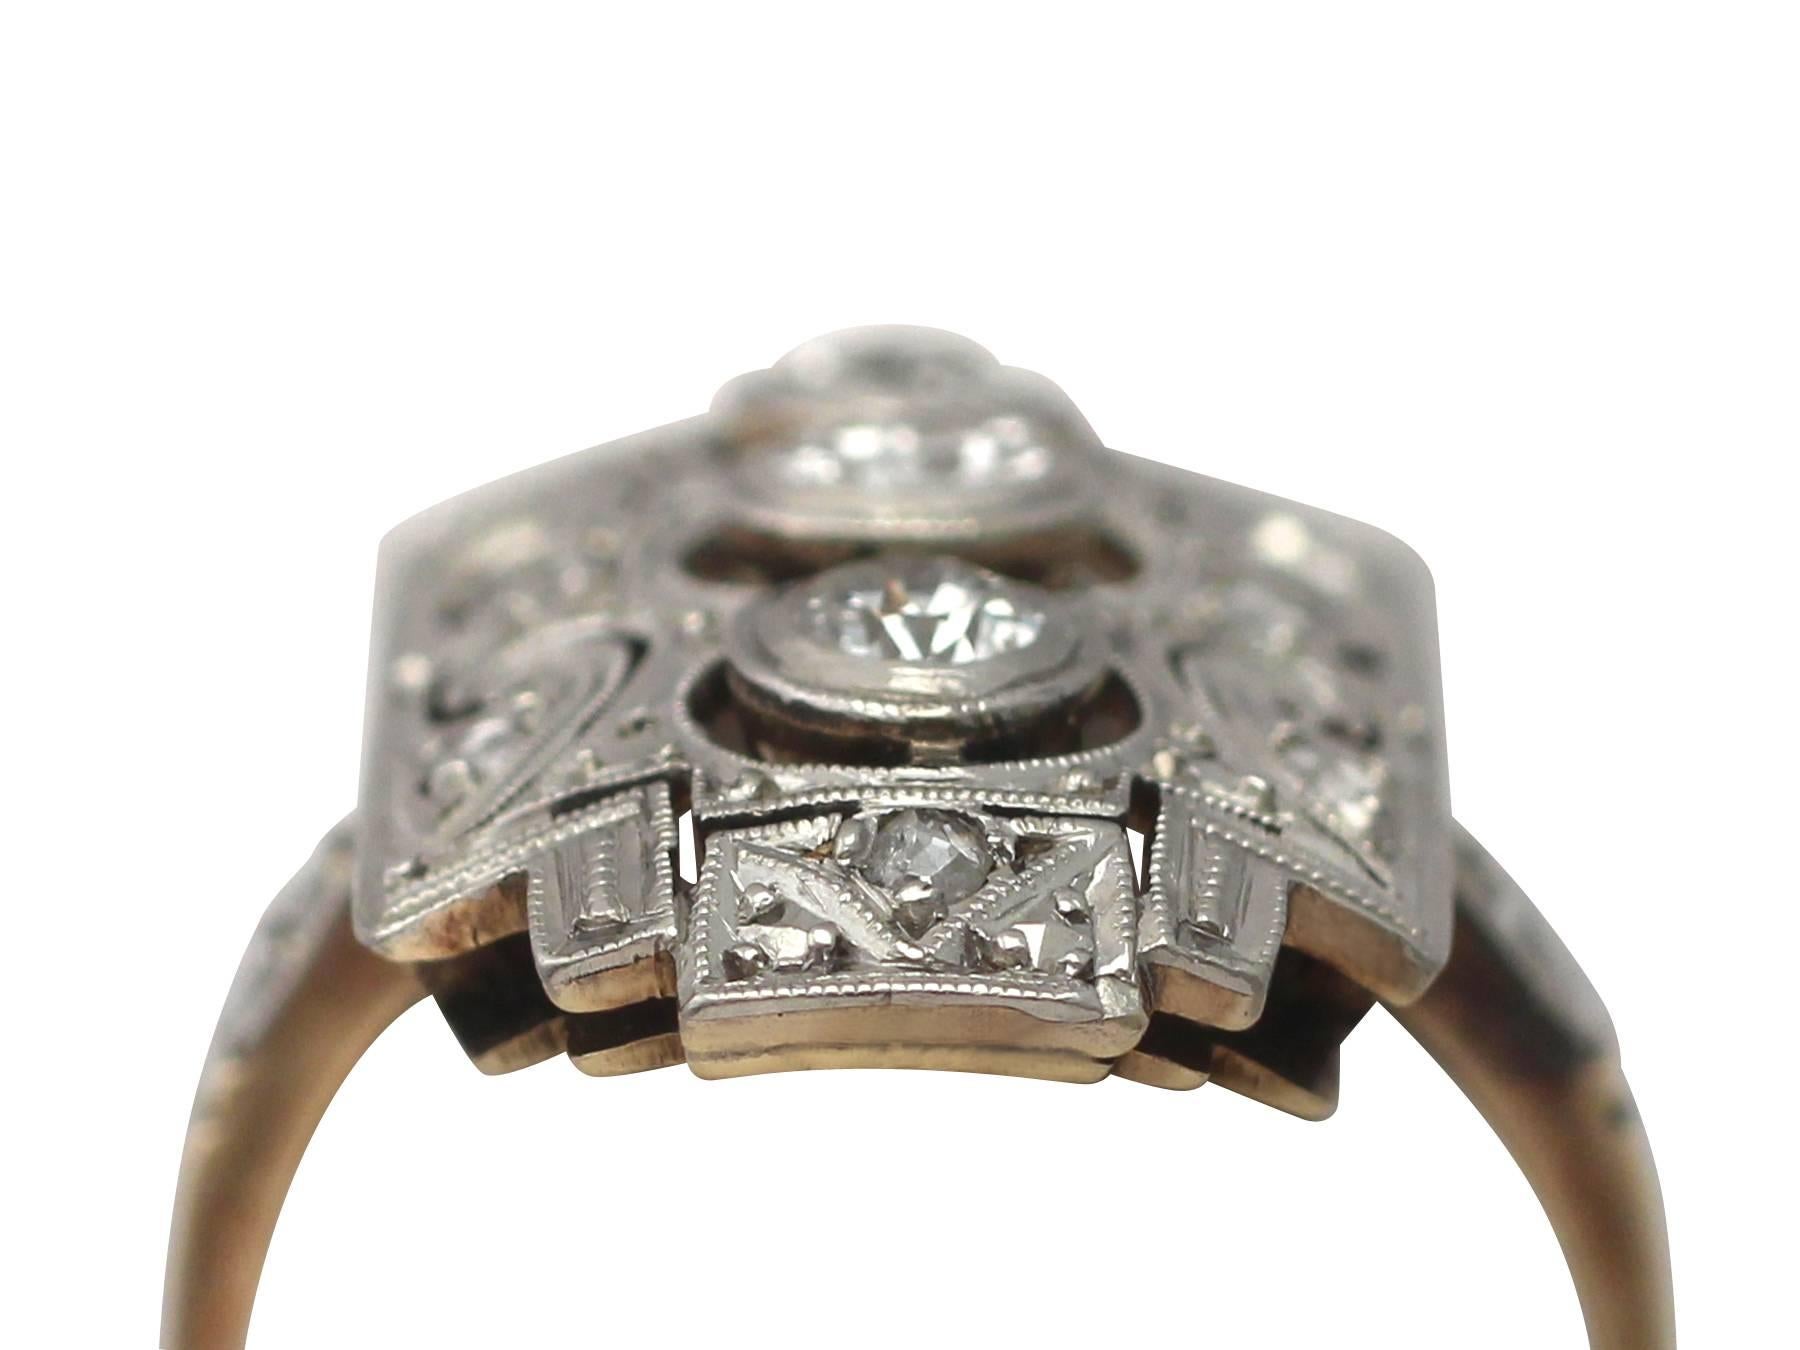 A fine and impressive antique Art Deco 0.88 carat diamond and 14 karat yellow gold, 14 karat white gold set dress ring; part of our diverse antique jewelry collections

This fine and impressive antique Art Deco diamond ring has been crafted in 14k